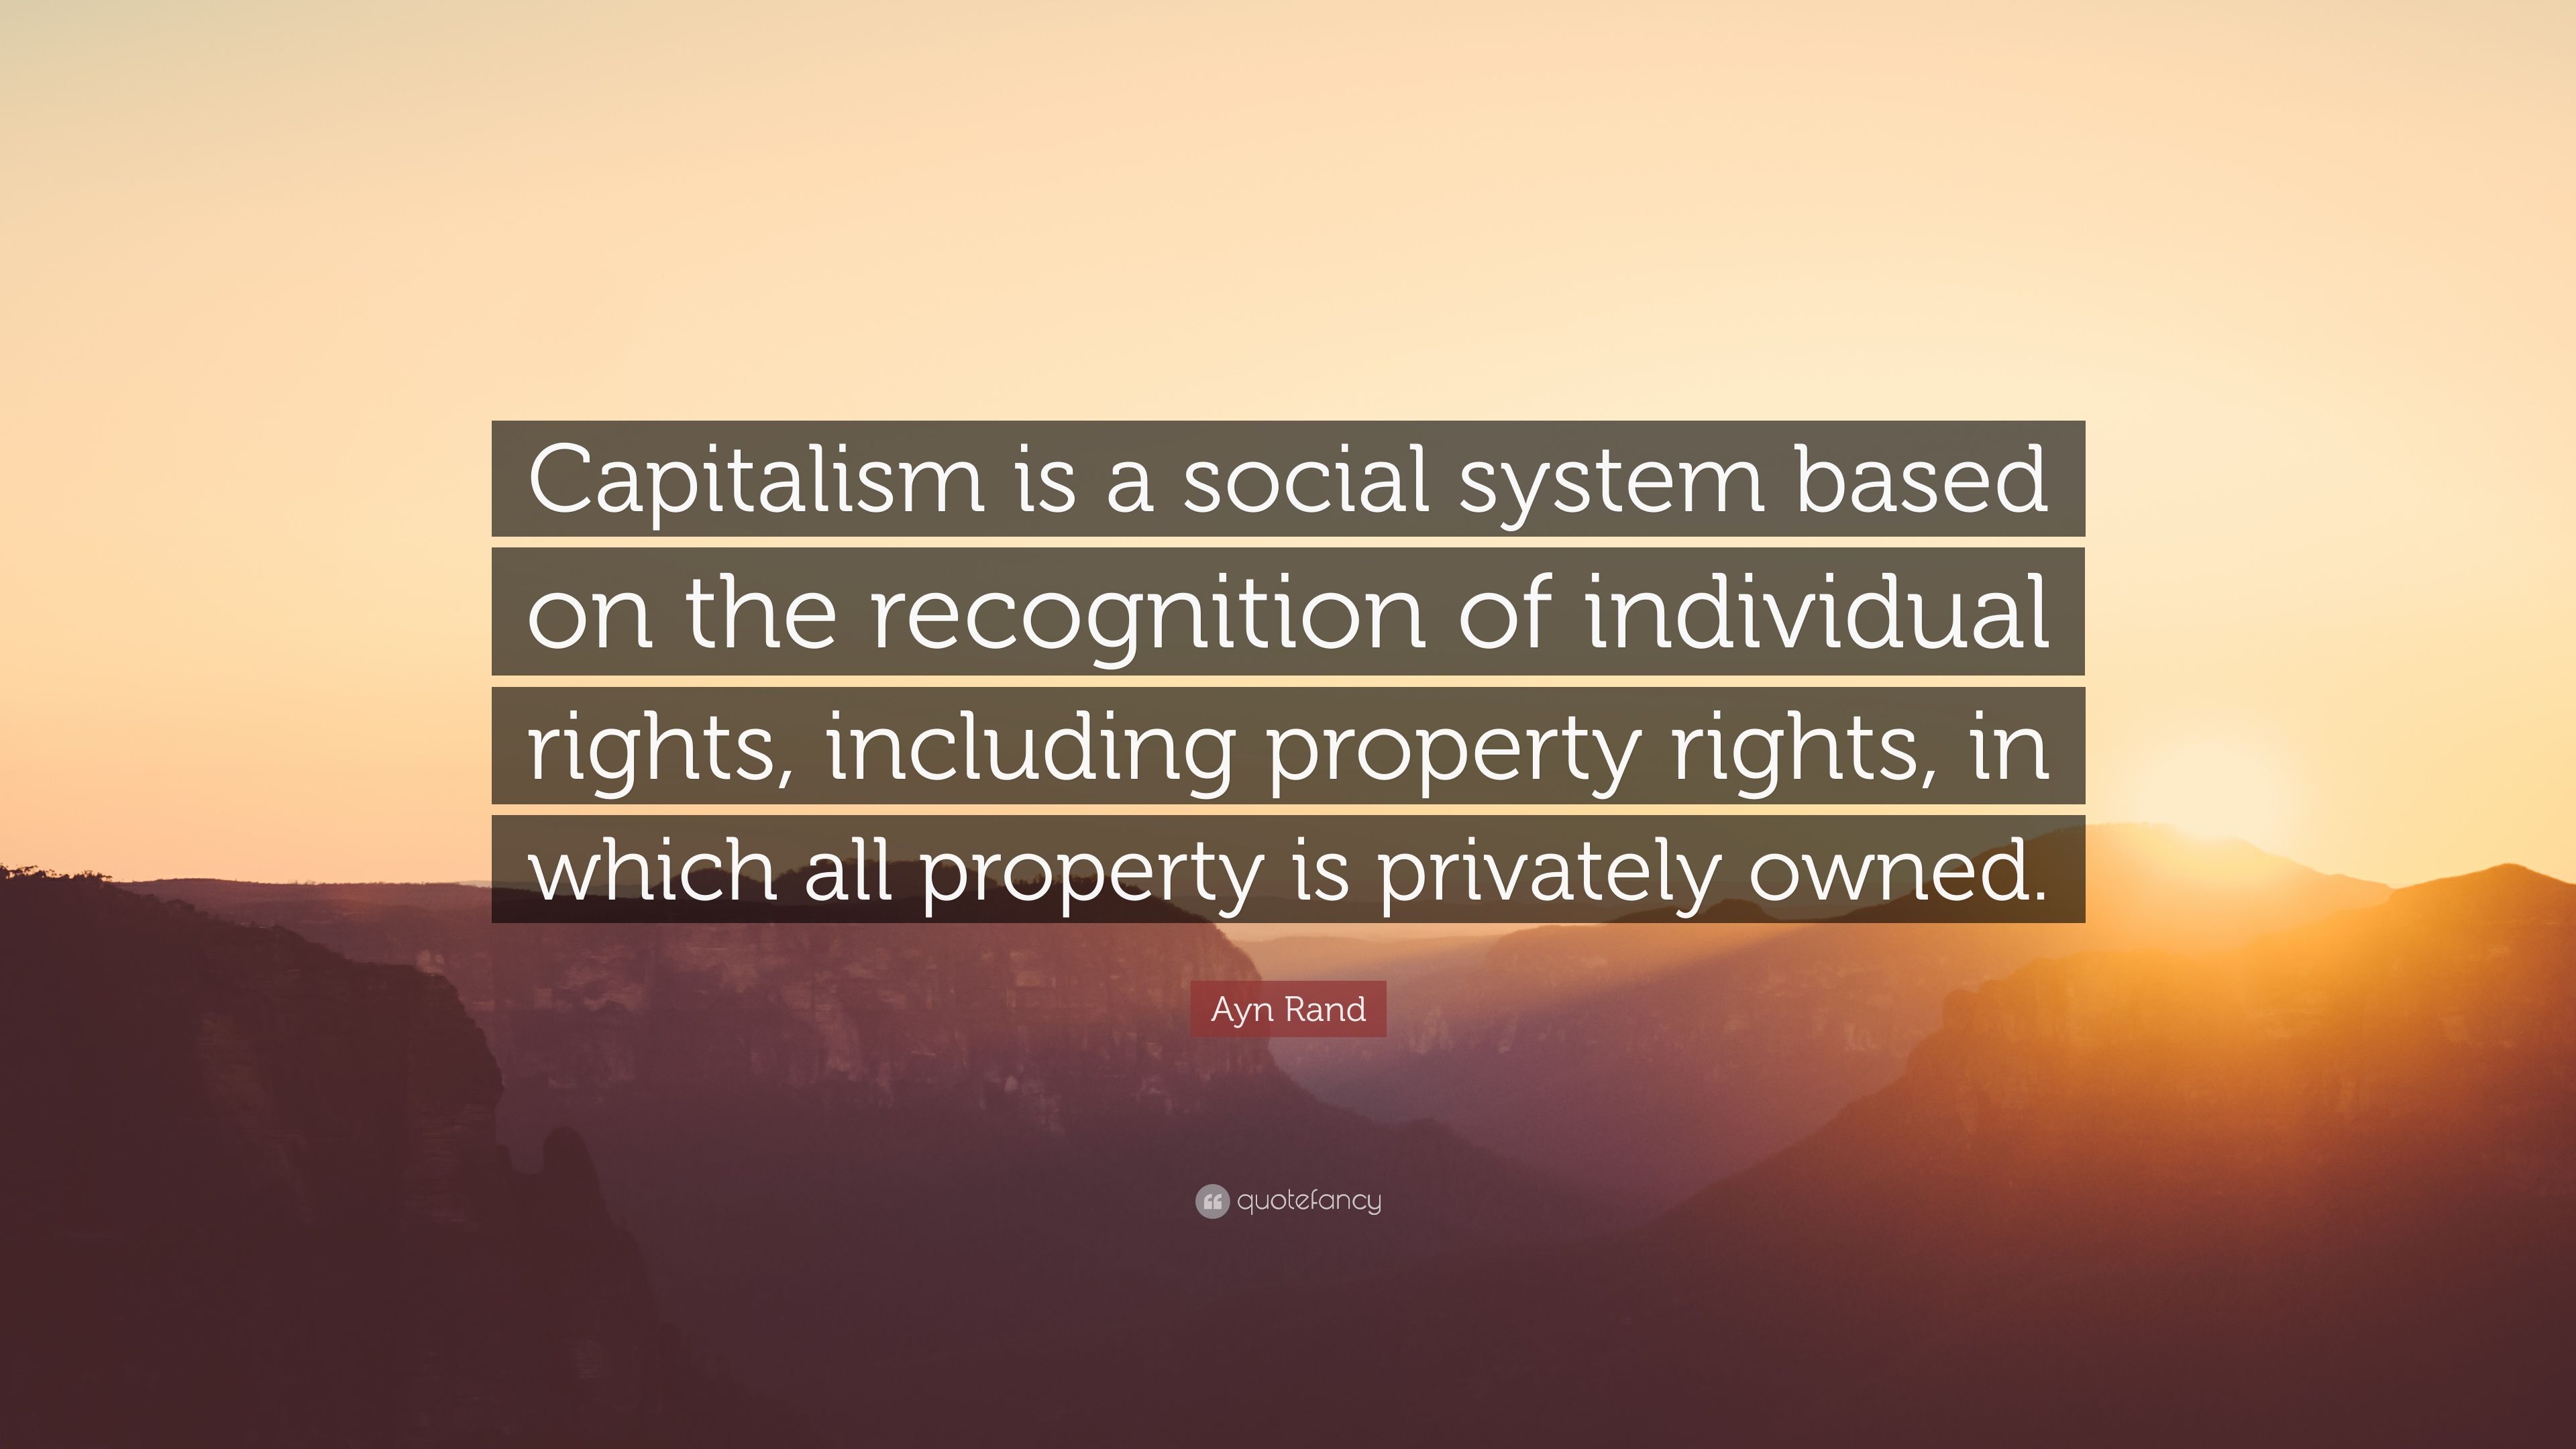 Ayn Rand Quote: “Capitalism is a social system based on the recognition of individual rights, including property rights, in which all pro.” (9 wallpaper)